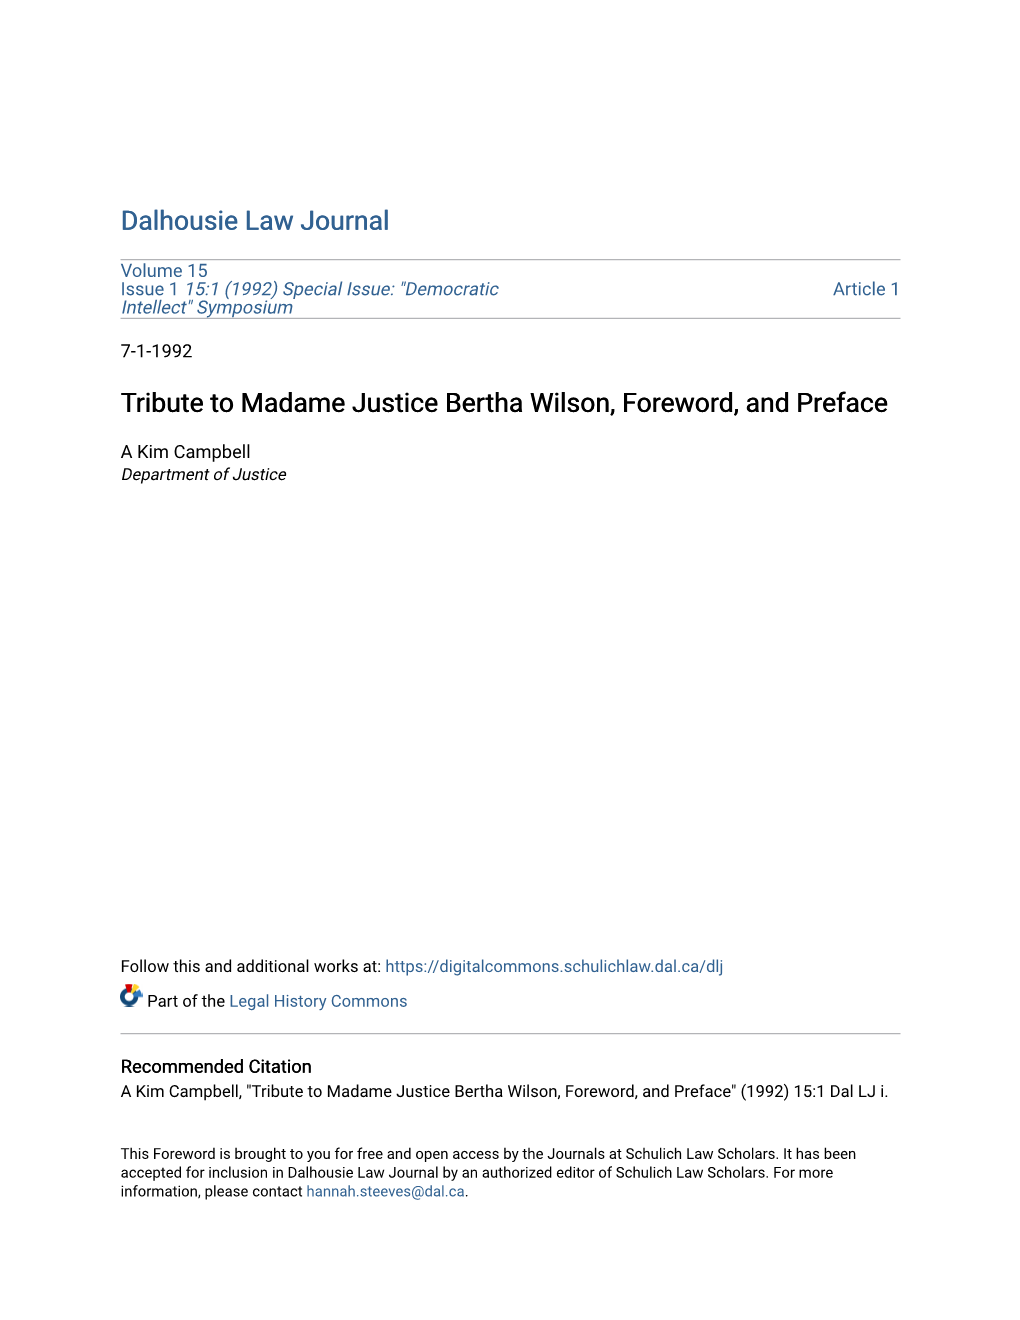 Tribute to Madame Justice Bertha Wilson, Foreword, and Preface